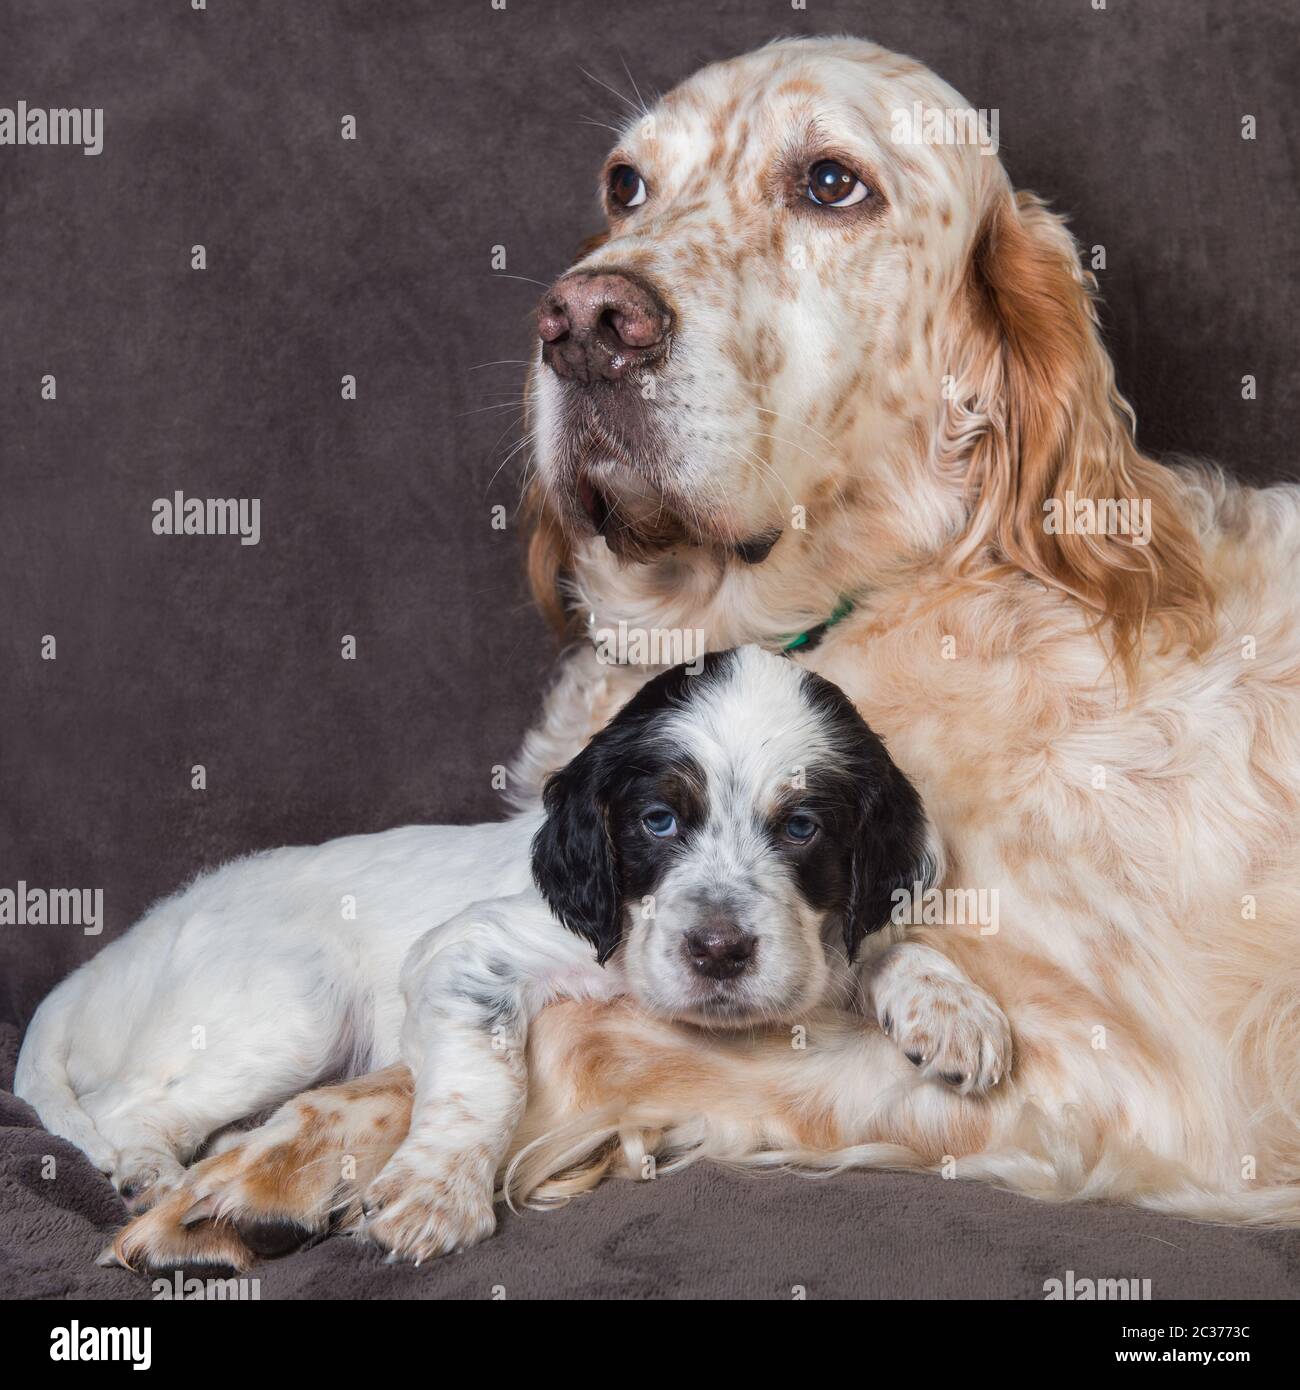 English setter big dog mother and puppy portrait Stock Photo